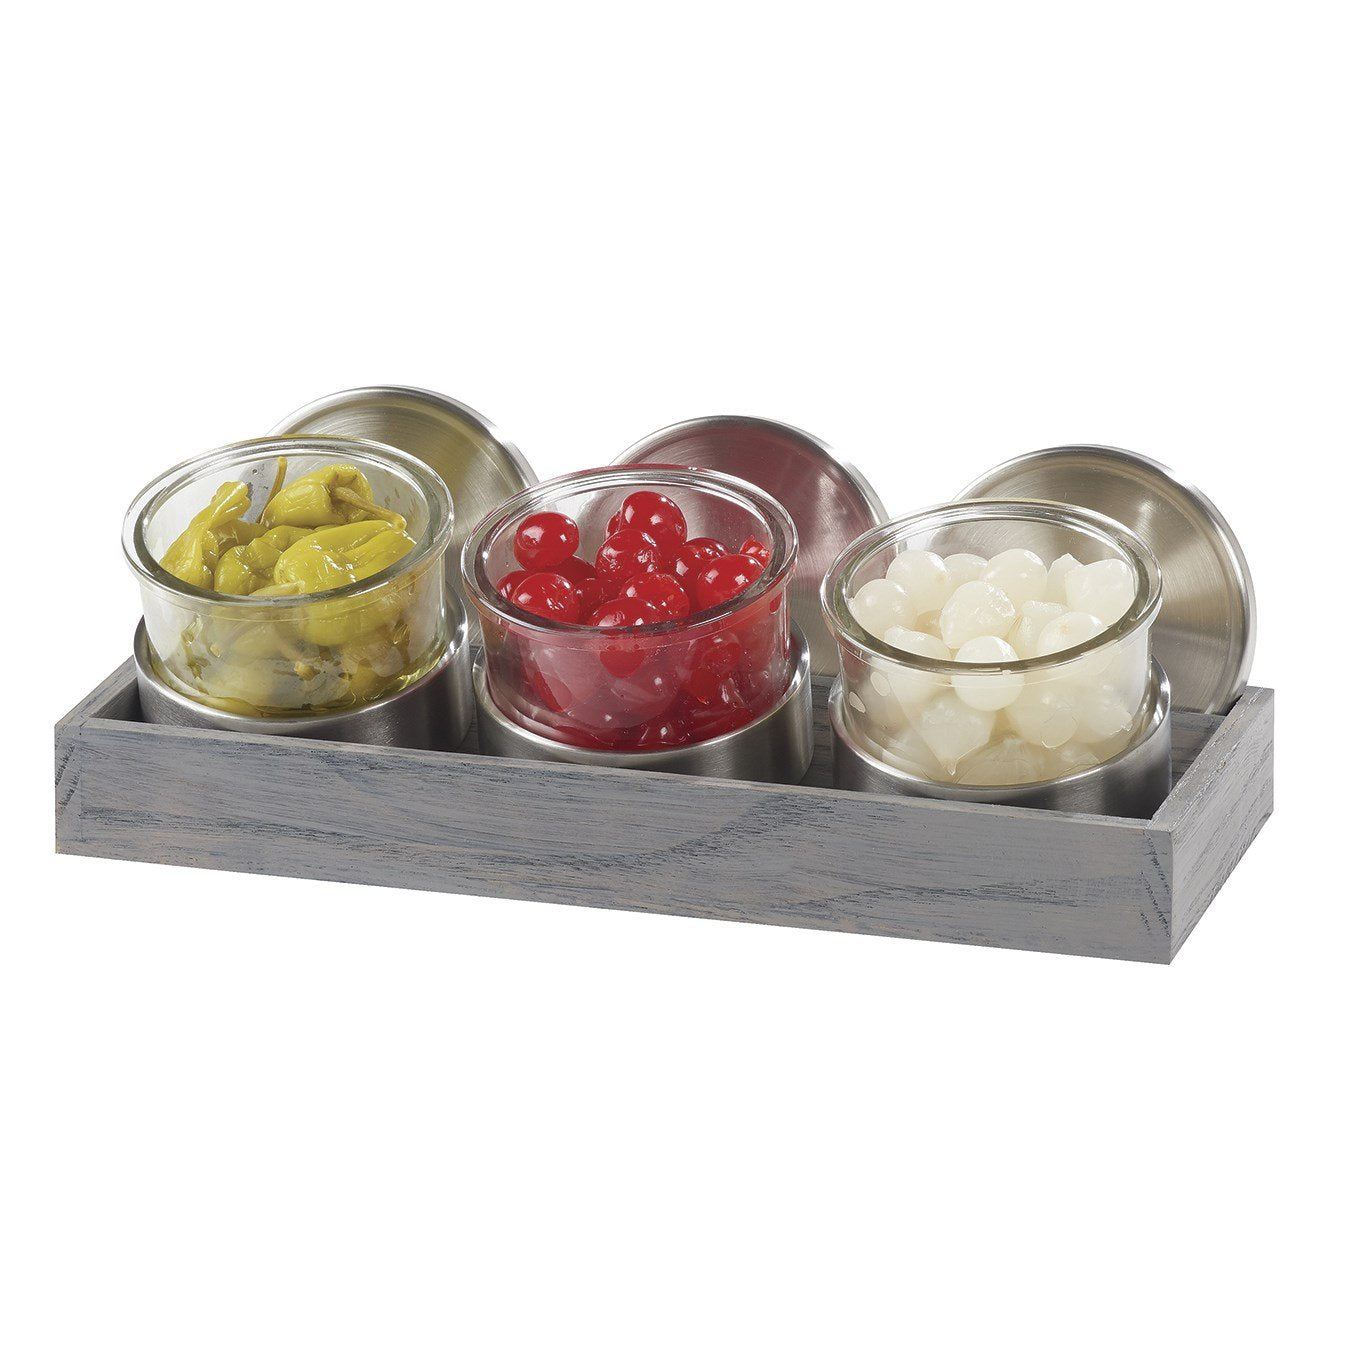 Cal-Mil 1850-4-83 Mixology Ashwood Three 16 Oz. Jar Display with Cooling Bases and Metal Lids, Stainless